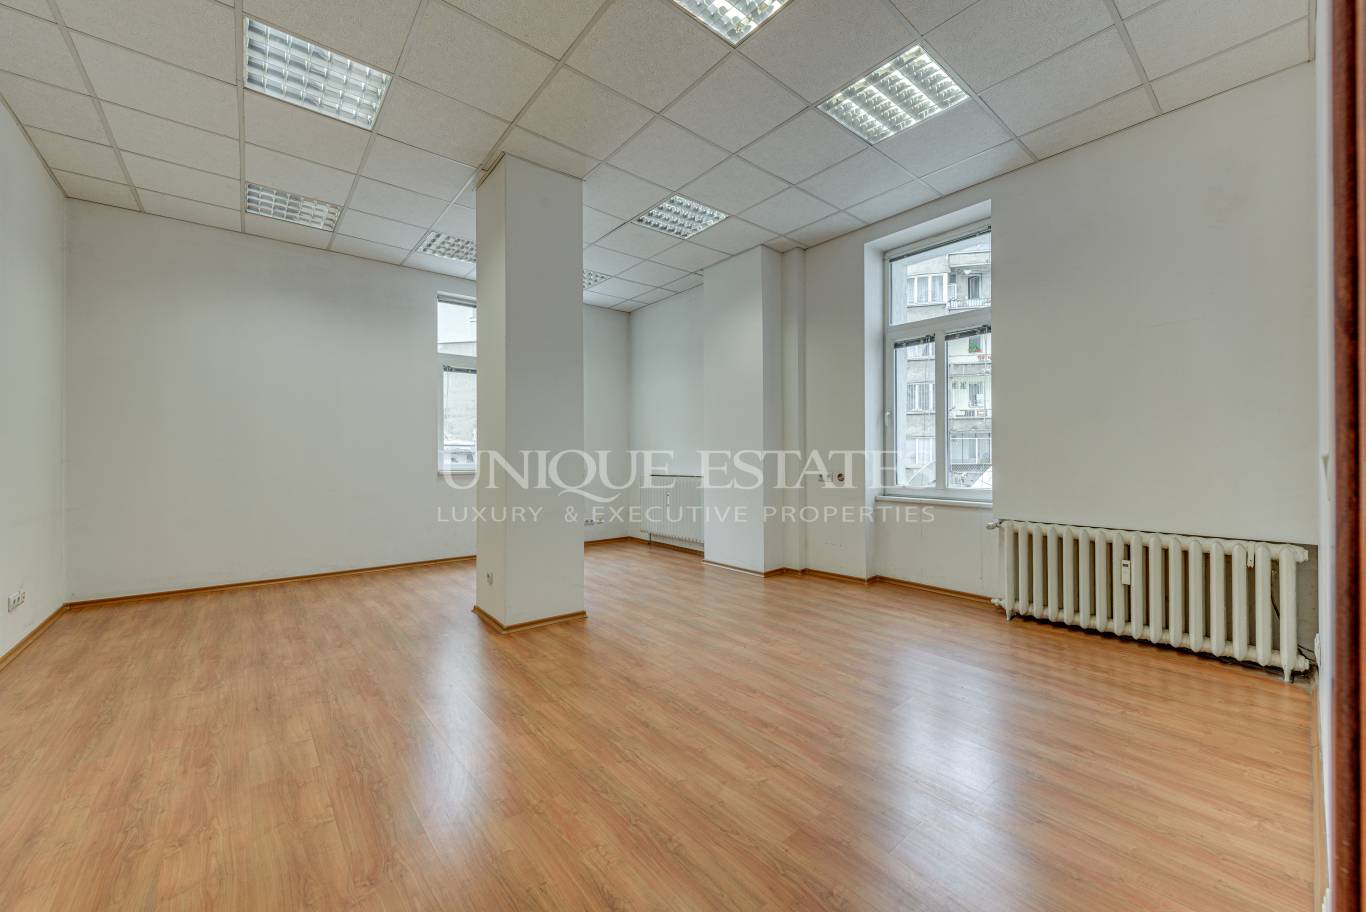 Office for rent in Sofia, Downtown with listing ID: K4831 - image 2